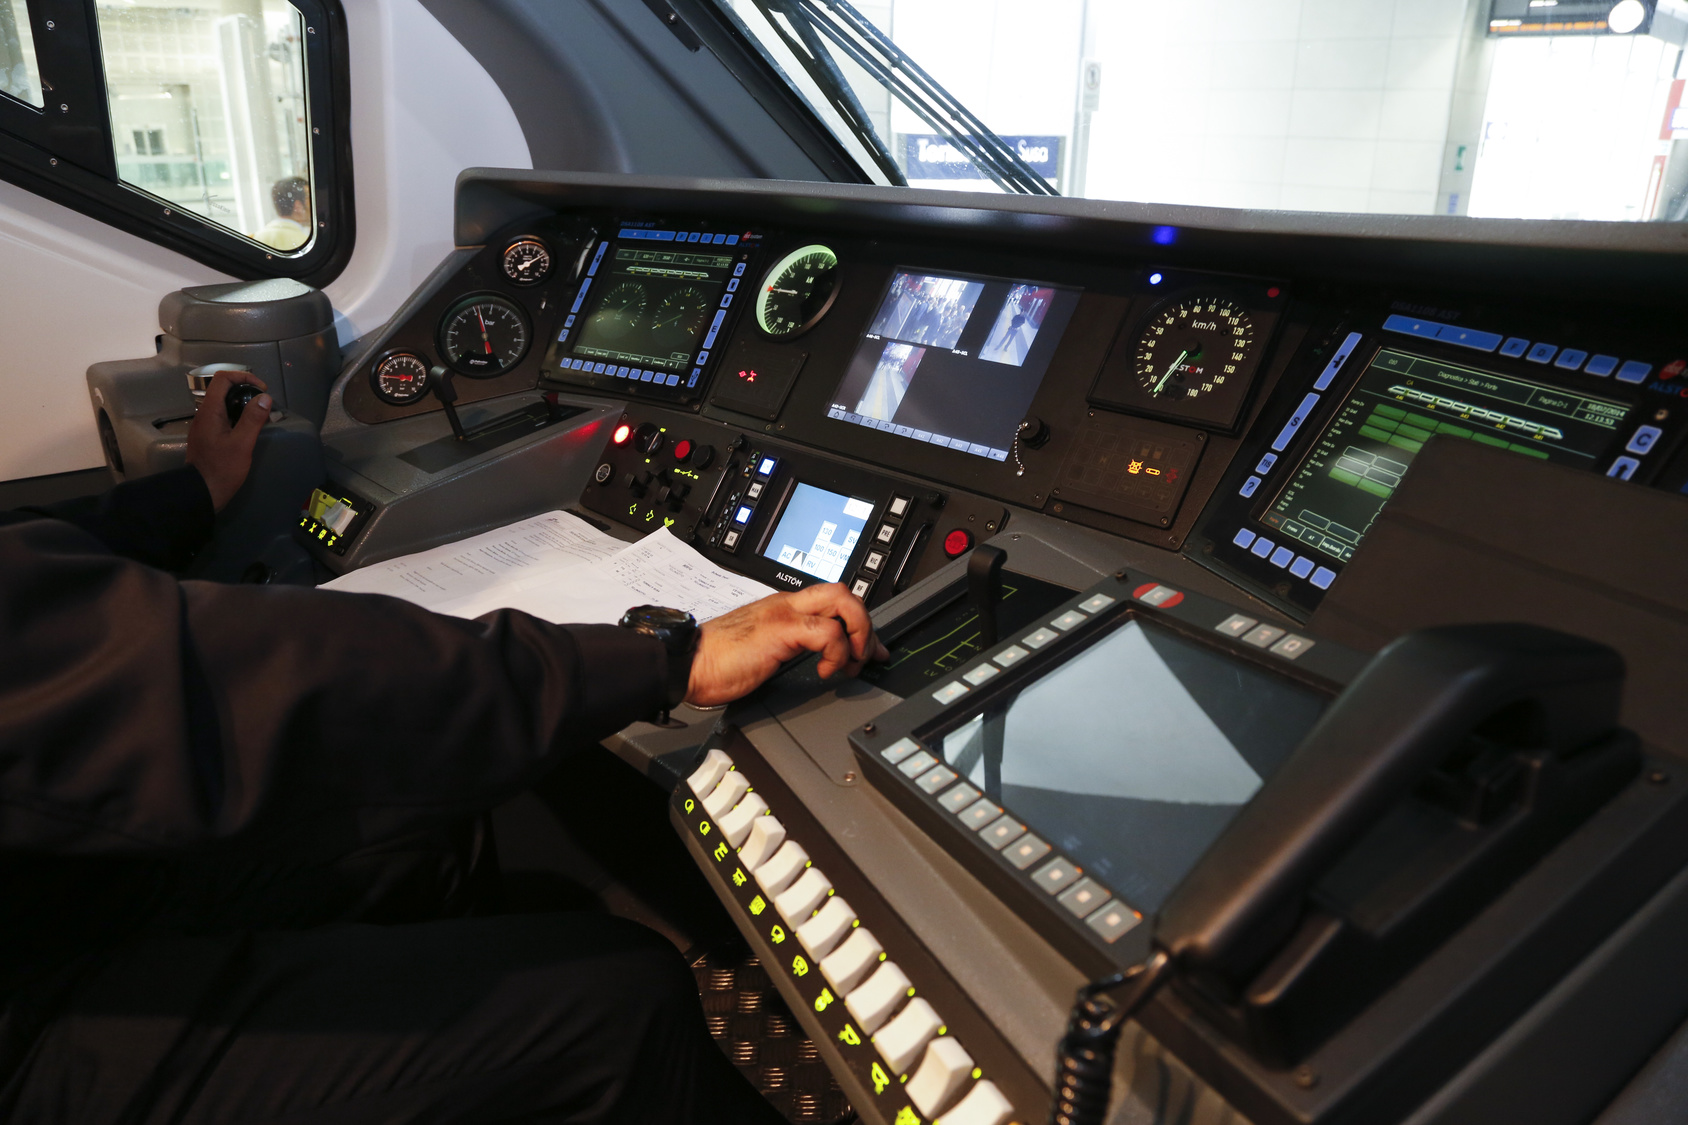 train driver careers will put you in contact with exciting new technology